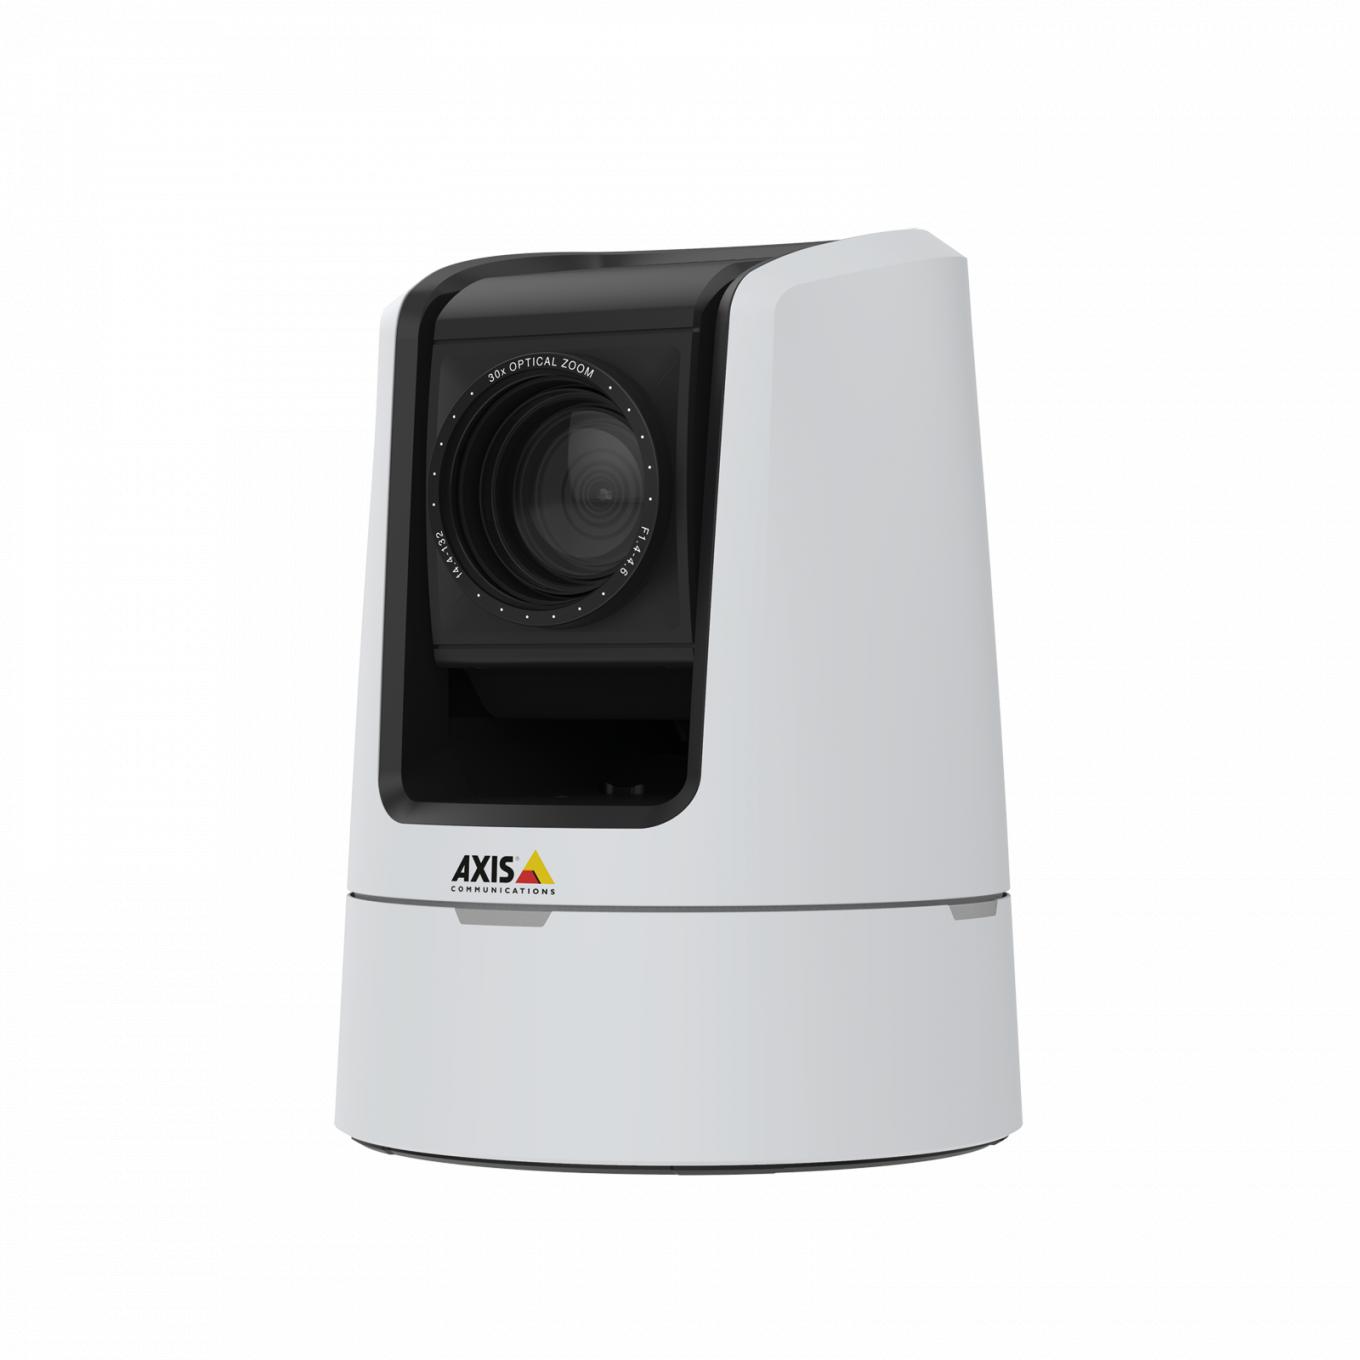 AXIS V5925 PTZ Network Camera | Axis Communications